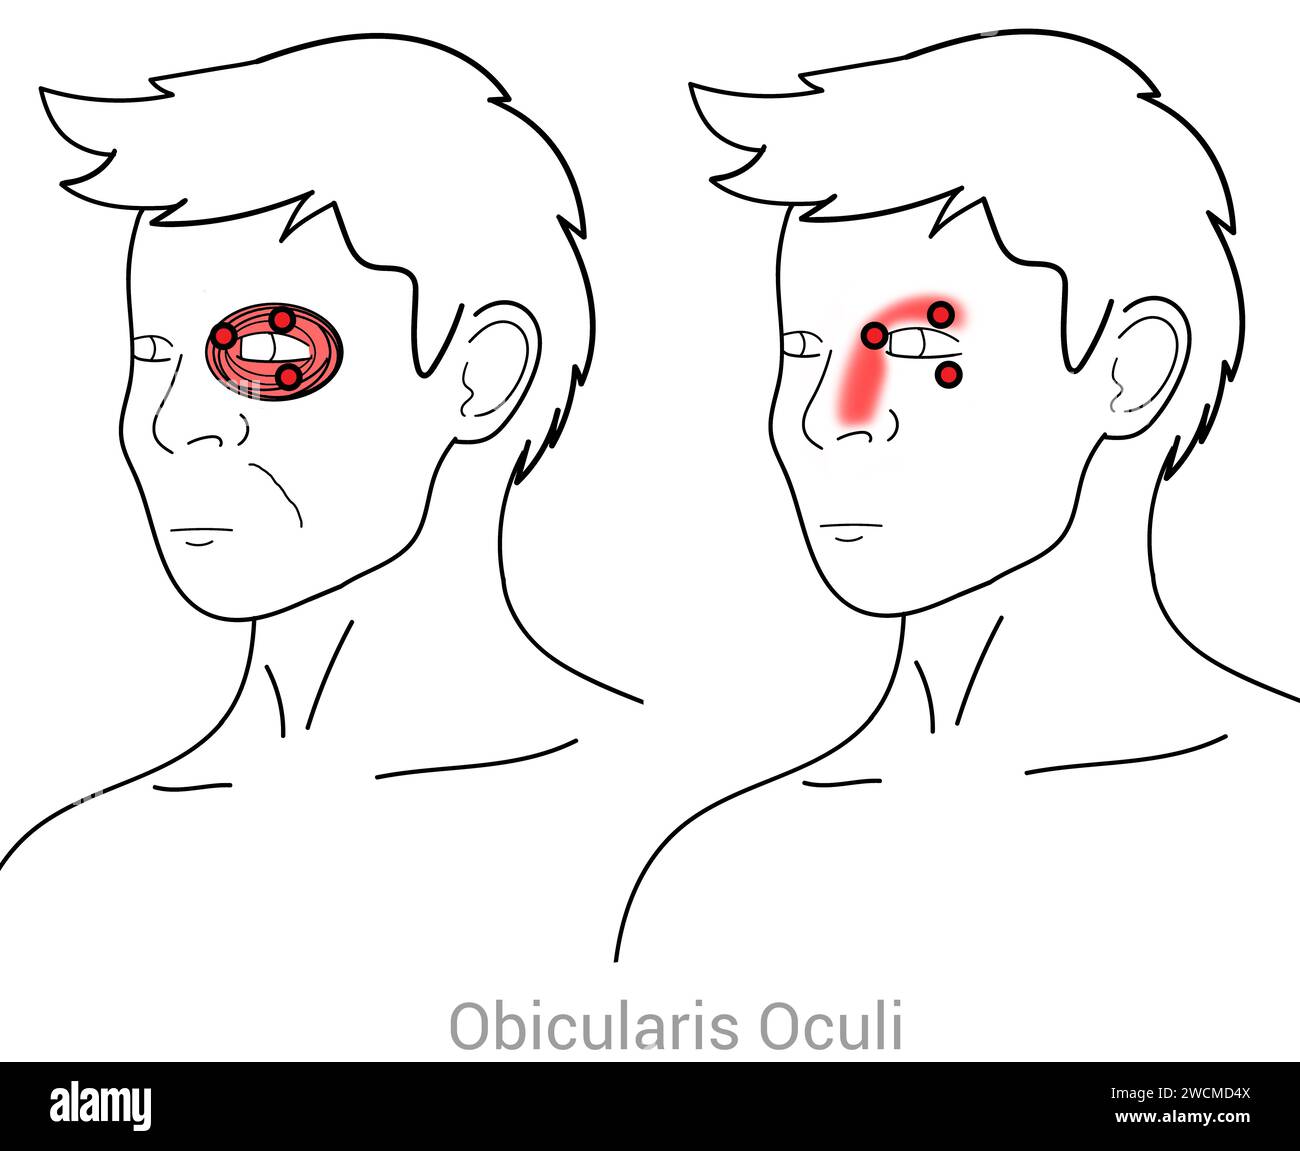 Obicularis Oculi: Myofascial trigger points and associated pain locations Stock Photo